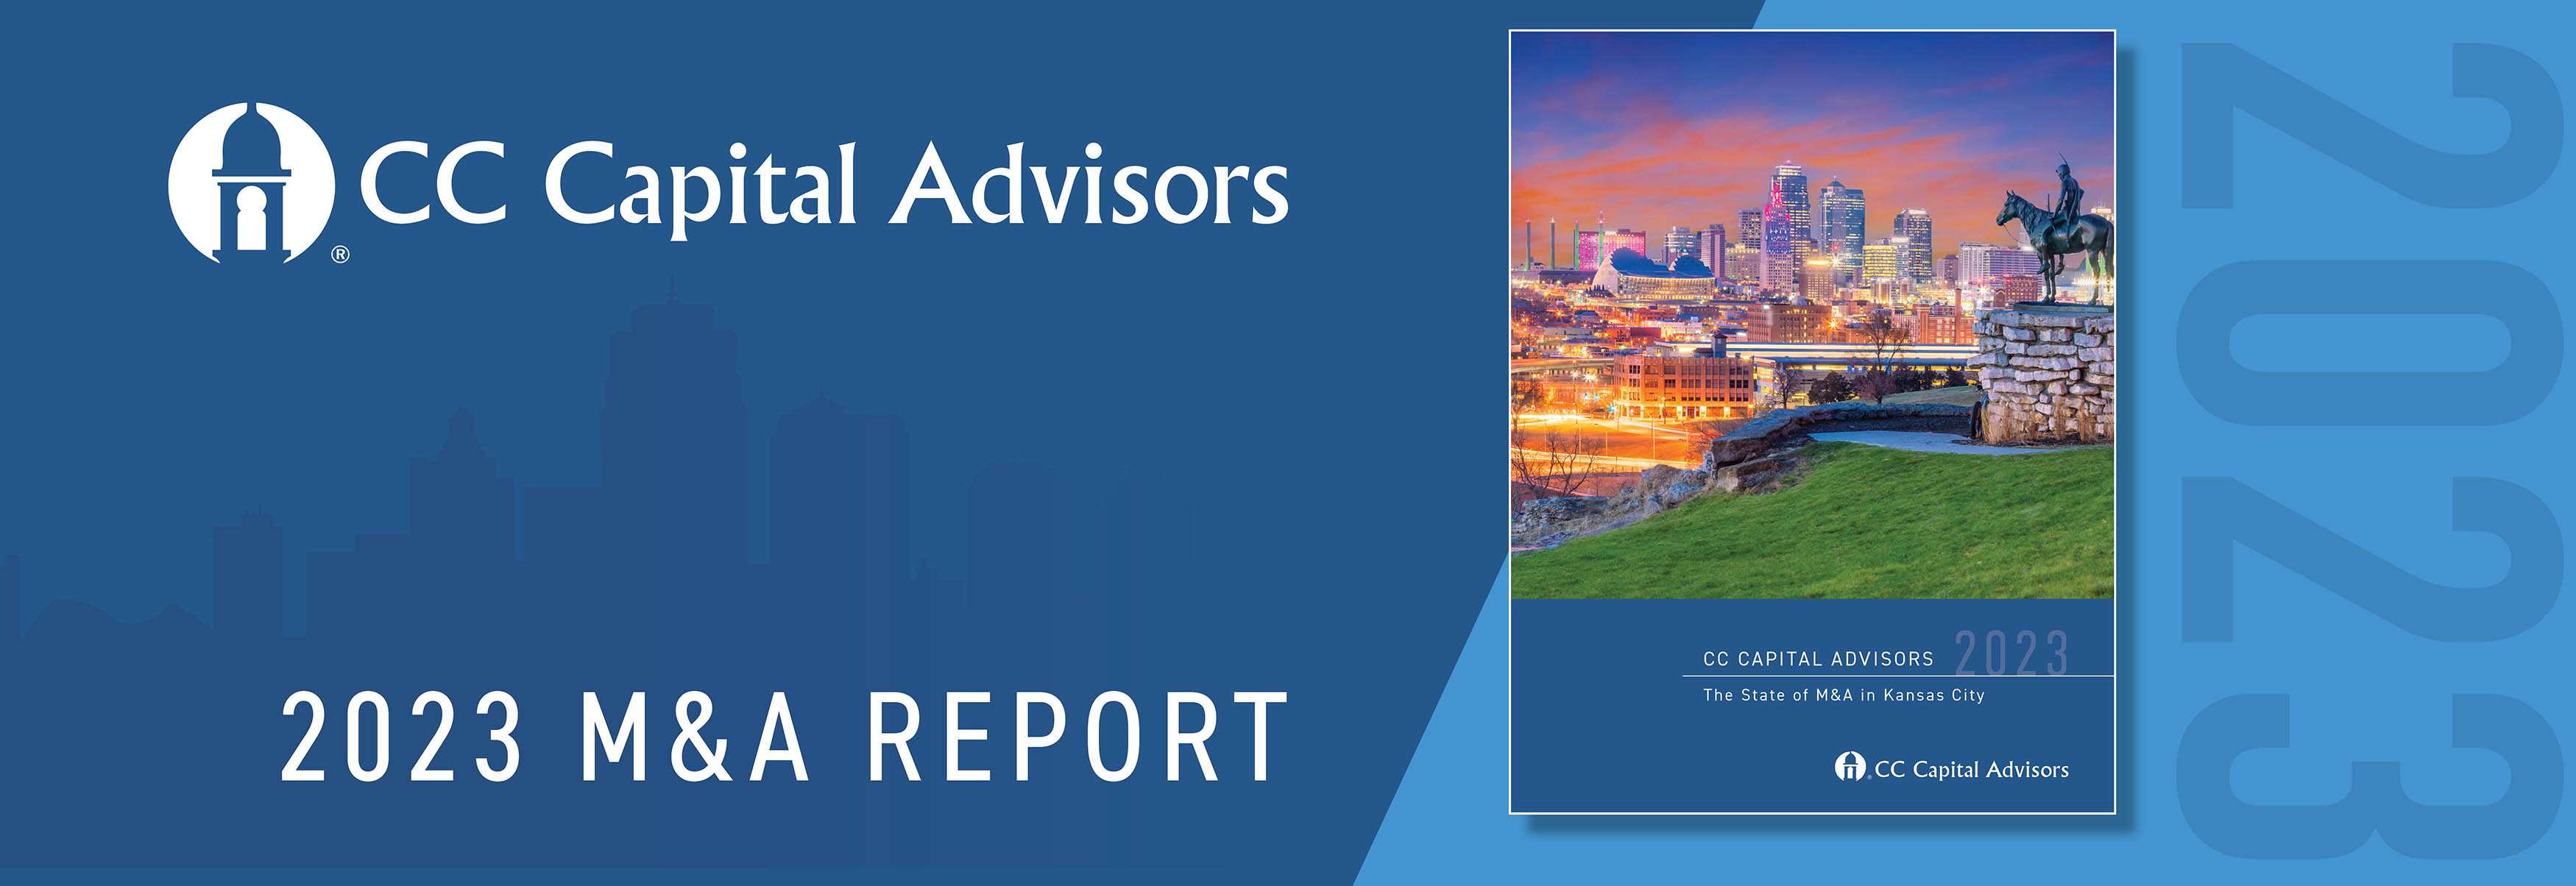 CC Capital Advisors 2023 State of M&A in Kansas City banner image